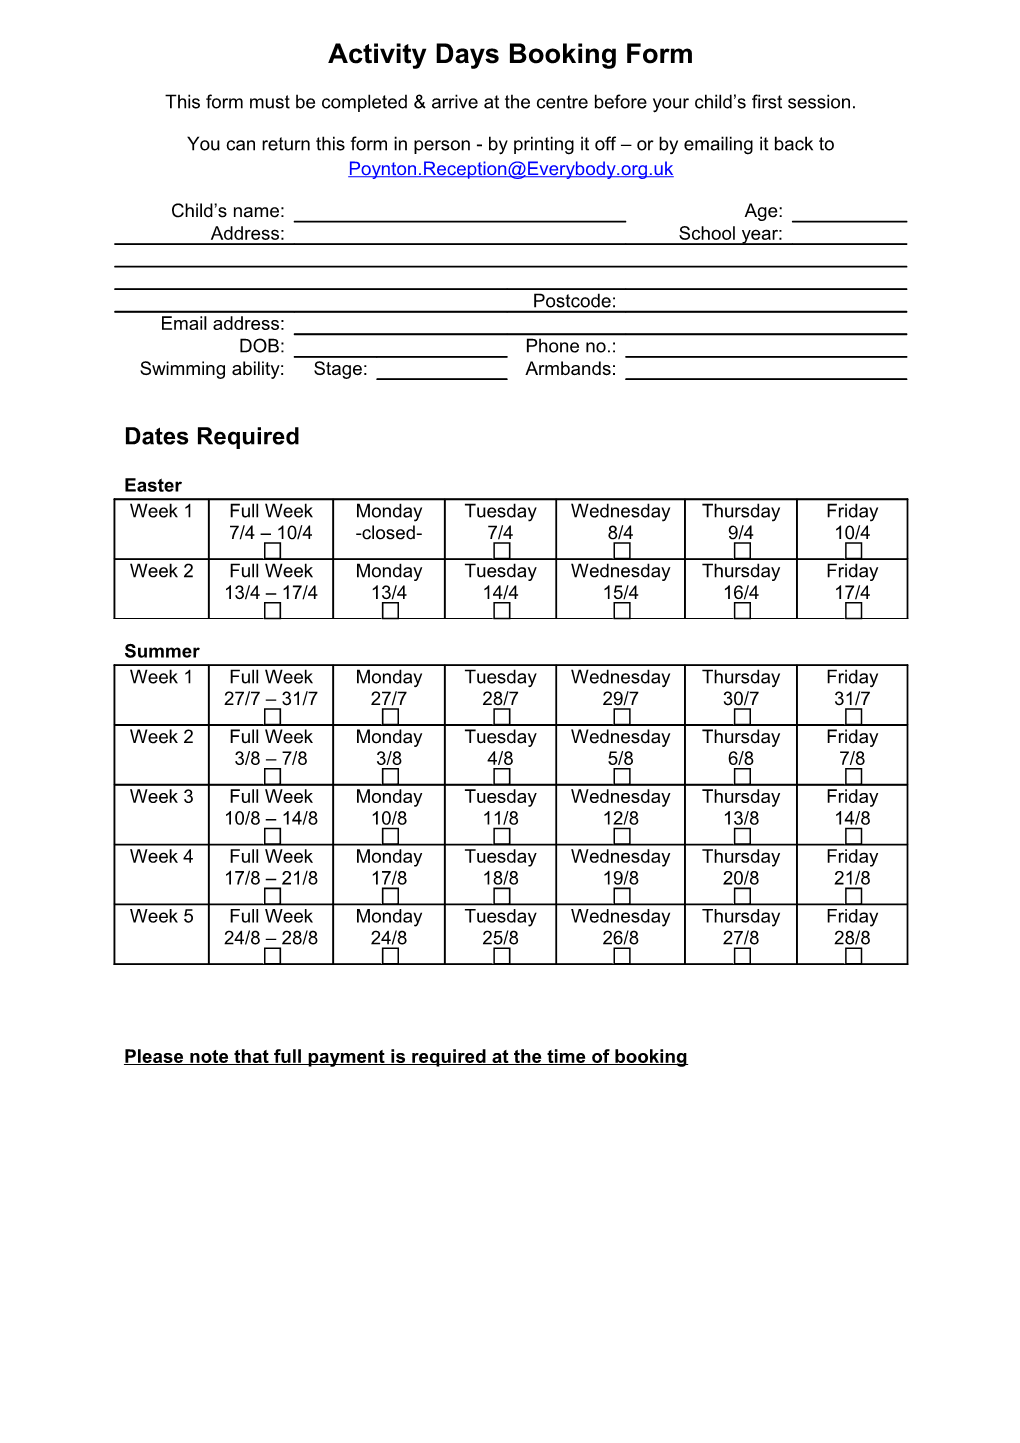 Activity Days Booking Form